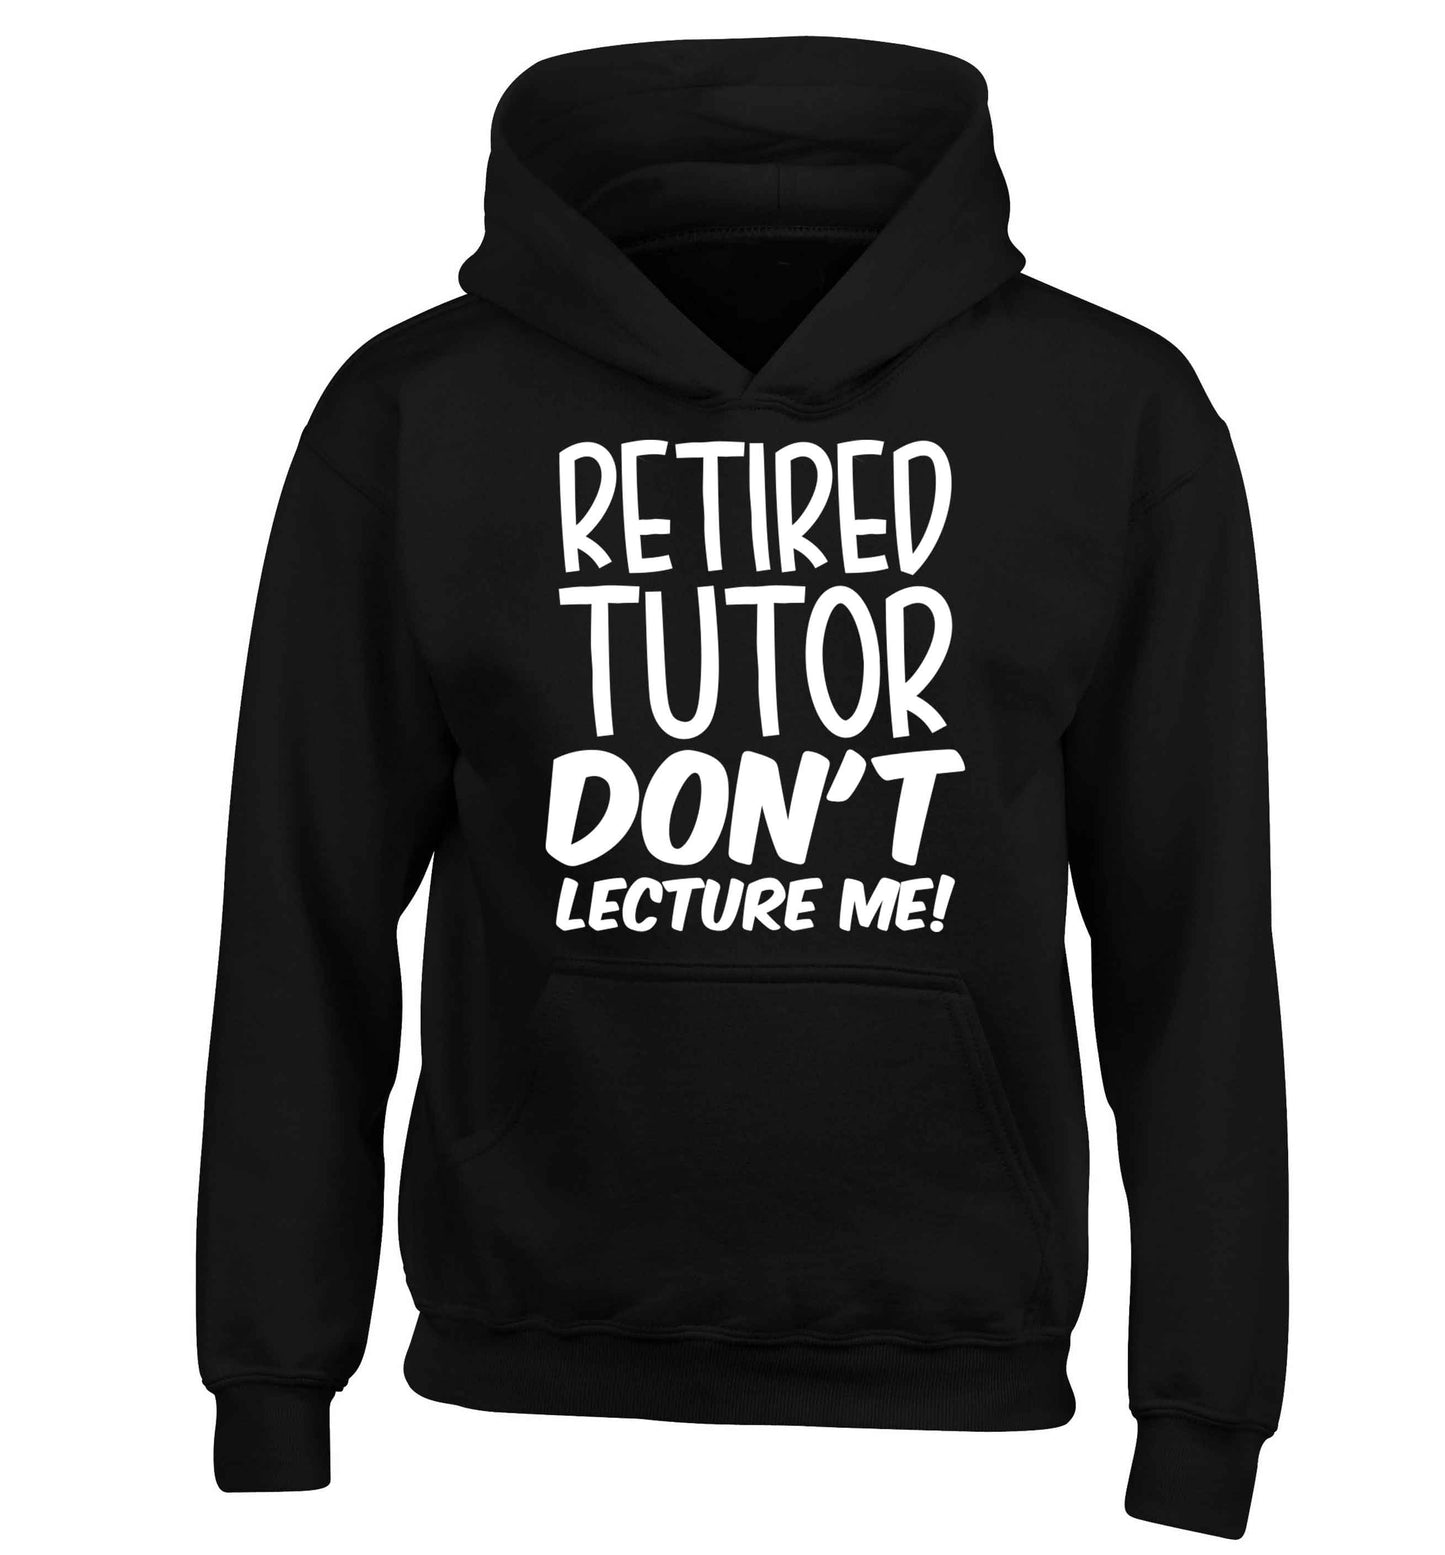 Retired tutor don't lecture me! children's black hoodie 12-13 Years